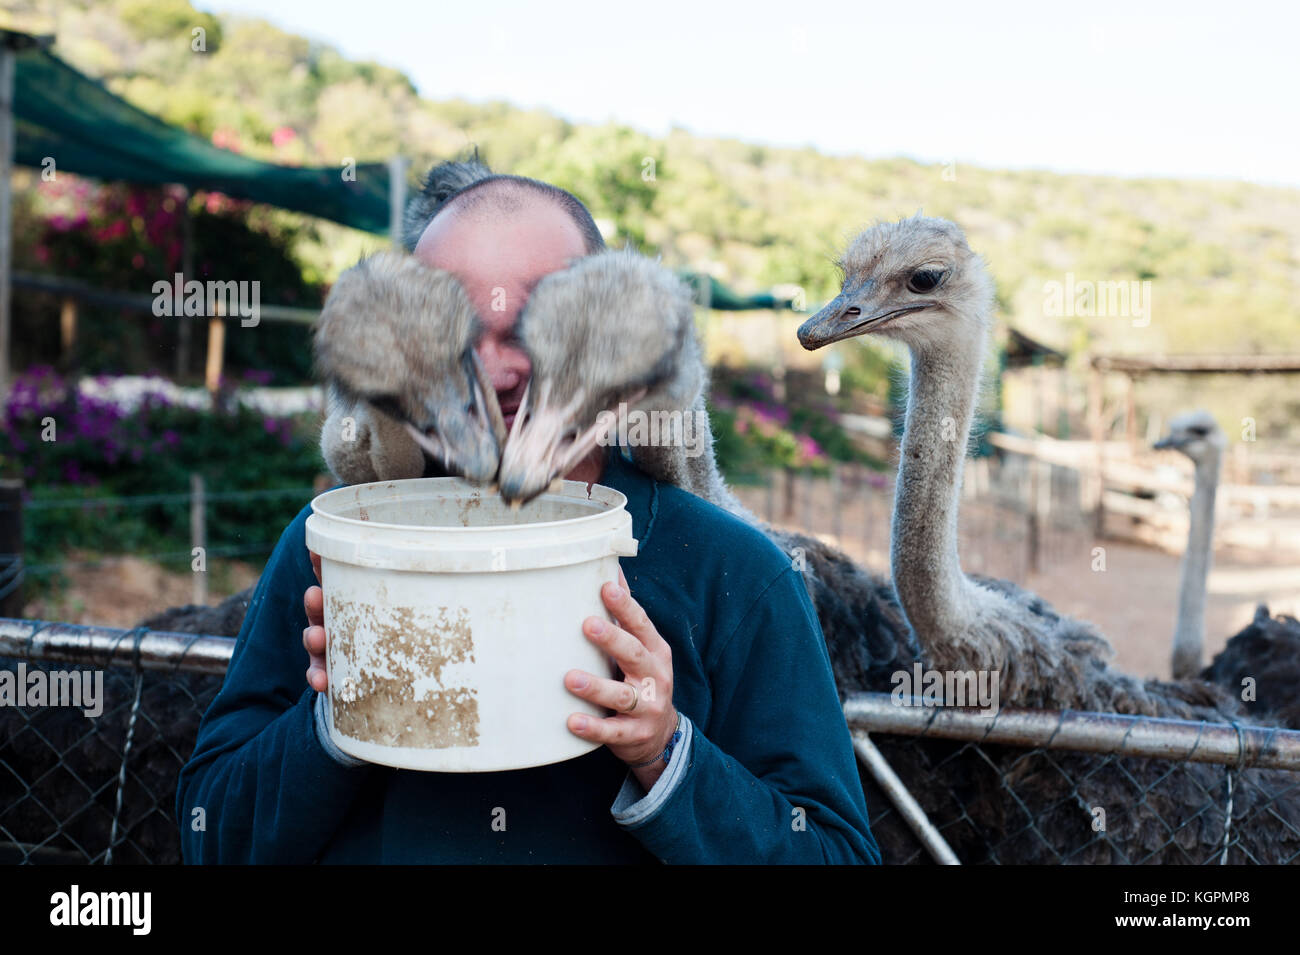 Mature man having fun giving food to ostriches in a private ranch near Cape Town. South Africa Stock Photo